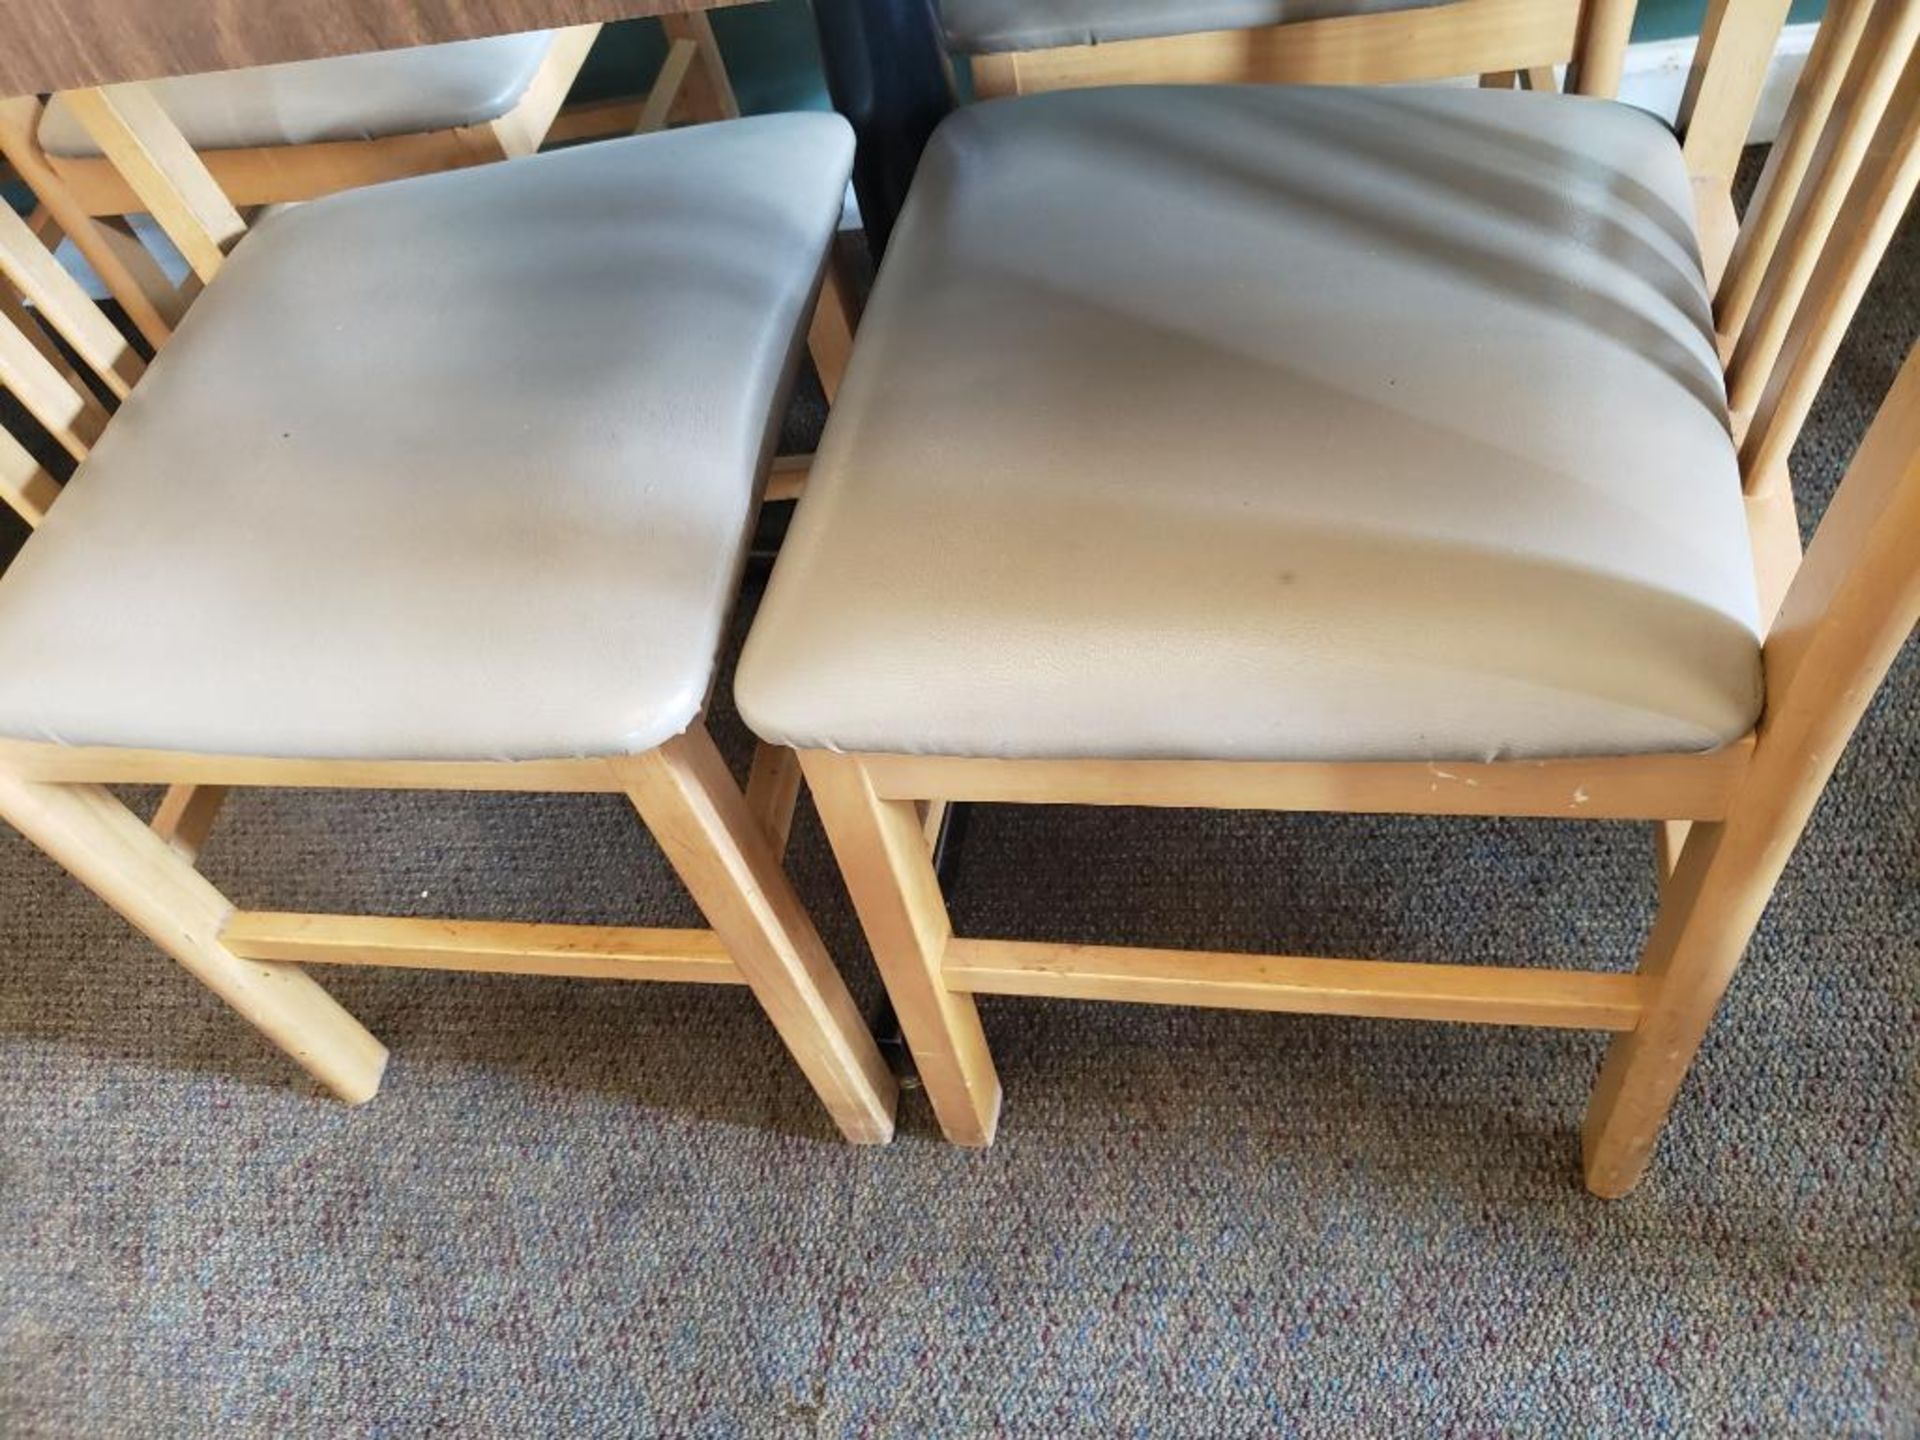 Table with 4 chairs. Table size 35in x 35in. - Image 3 of 4